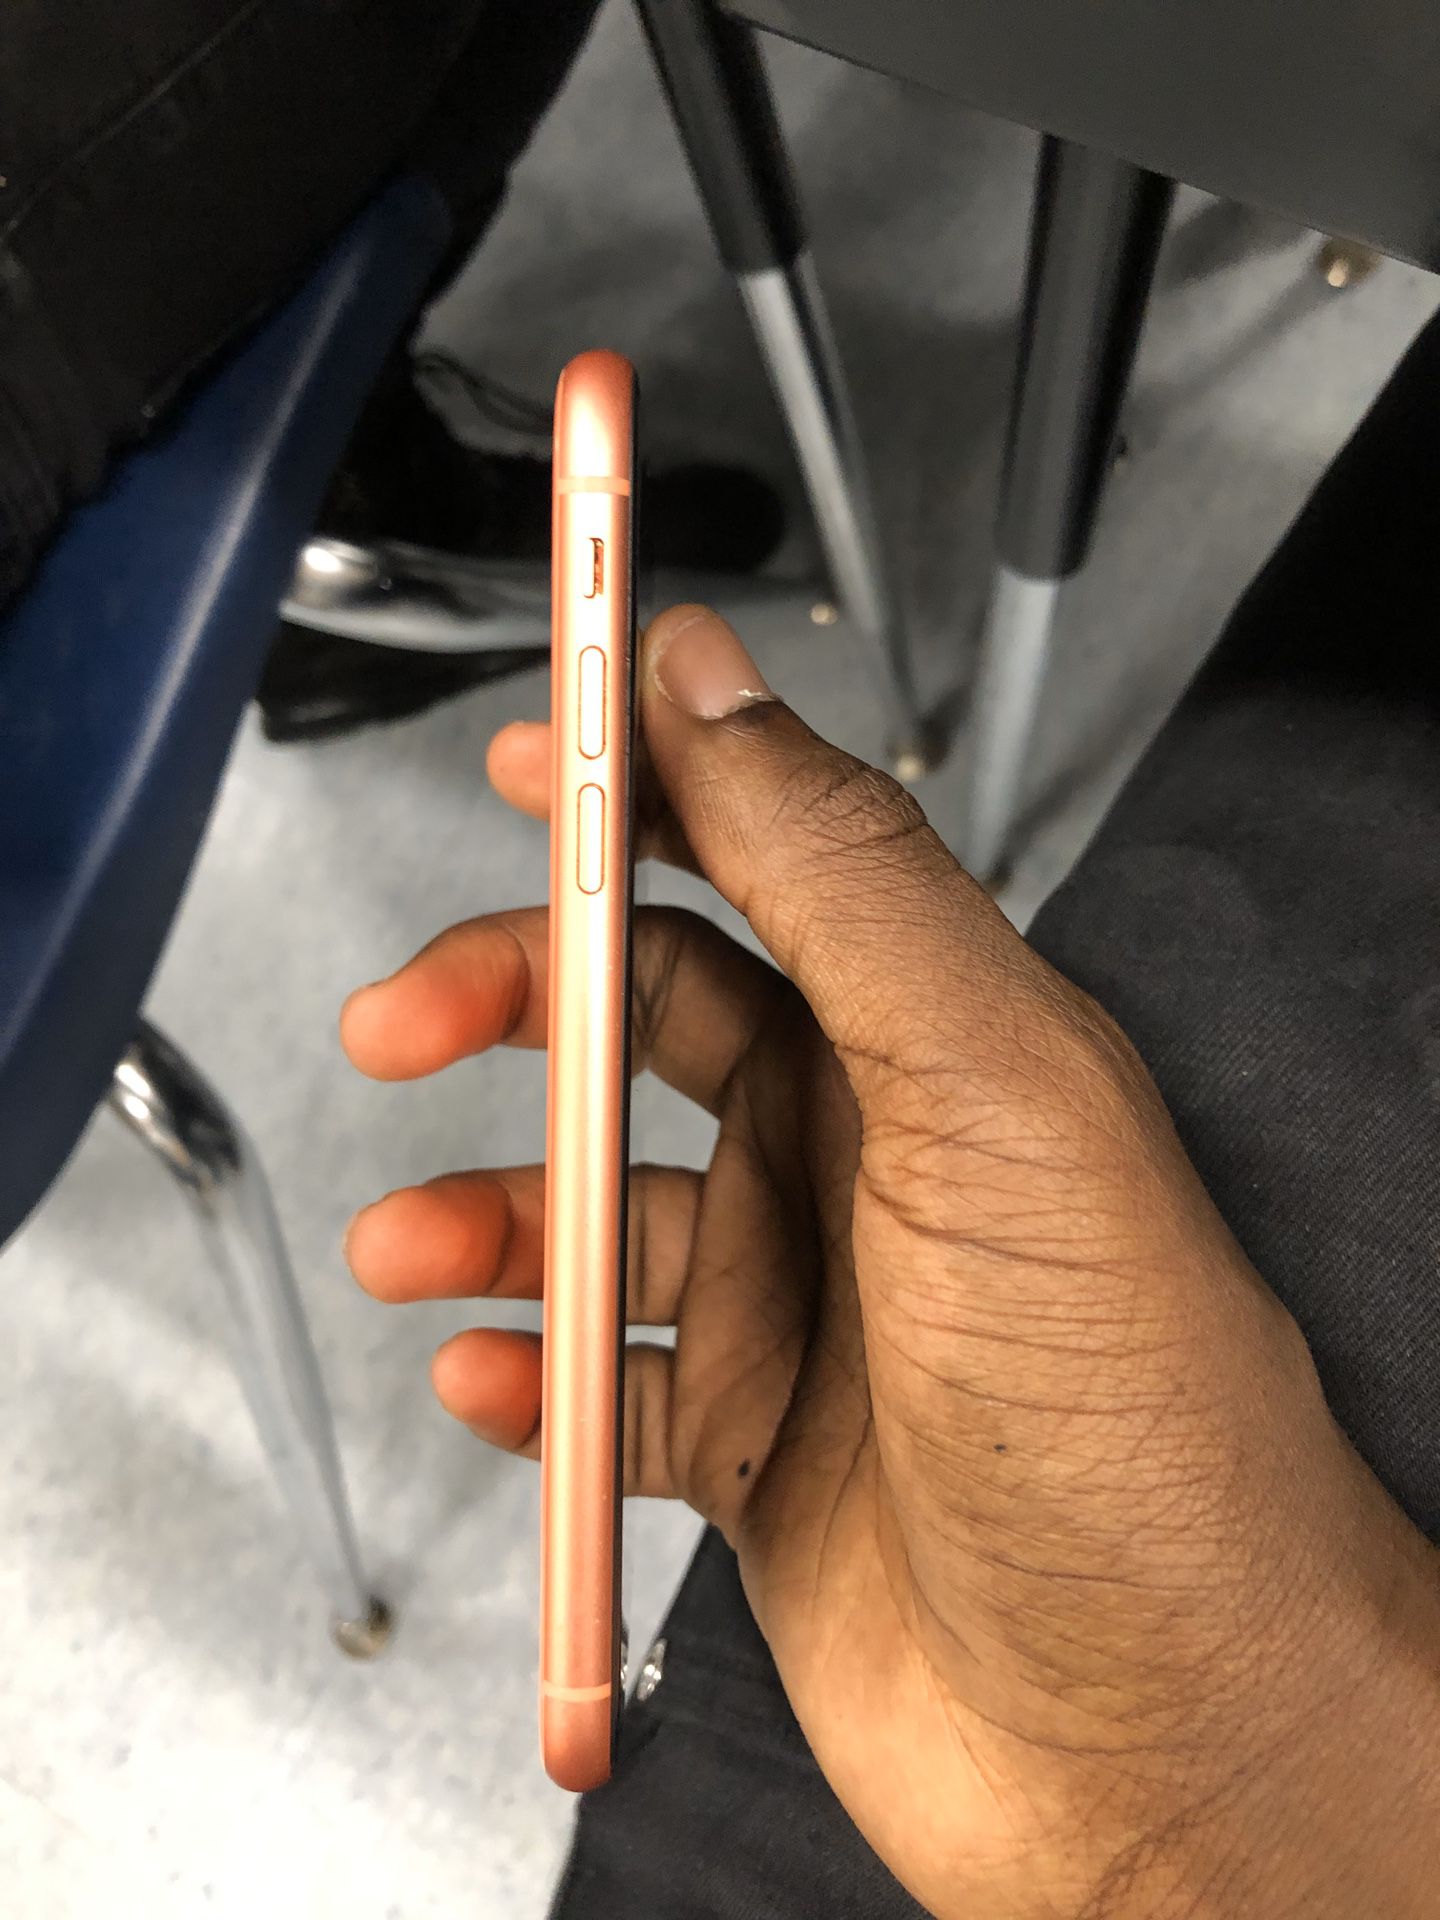 Apple iPhone XR (salmon color)